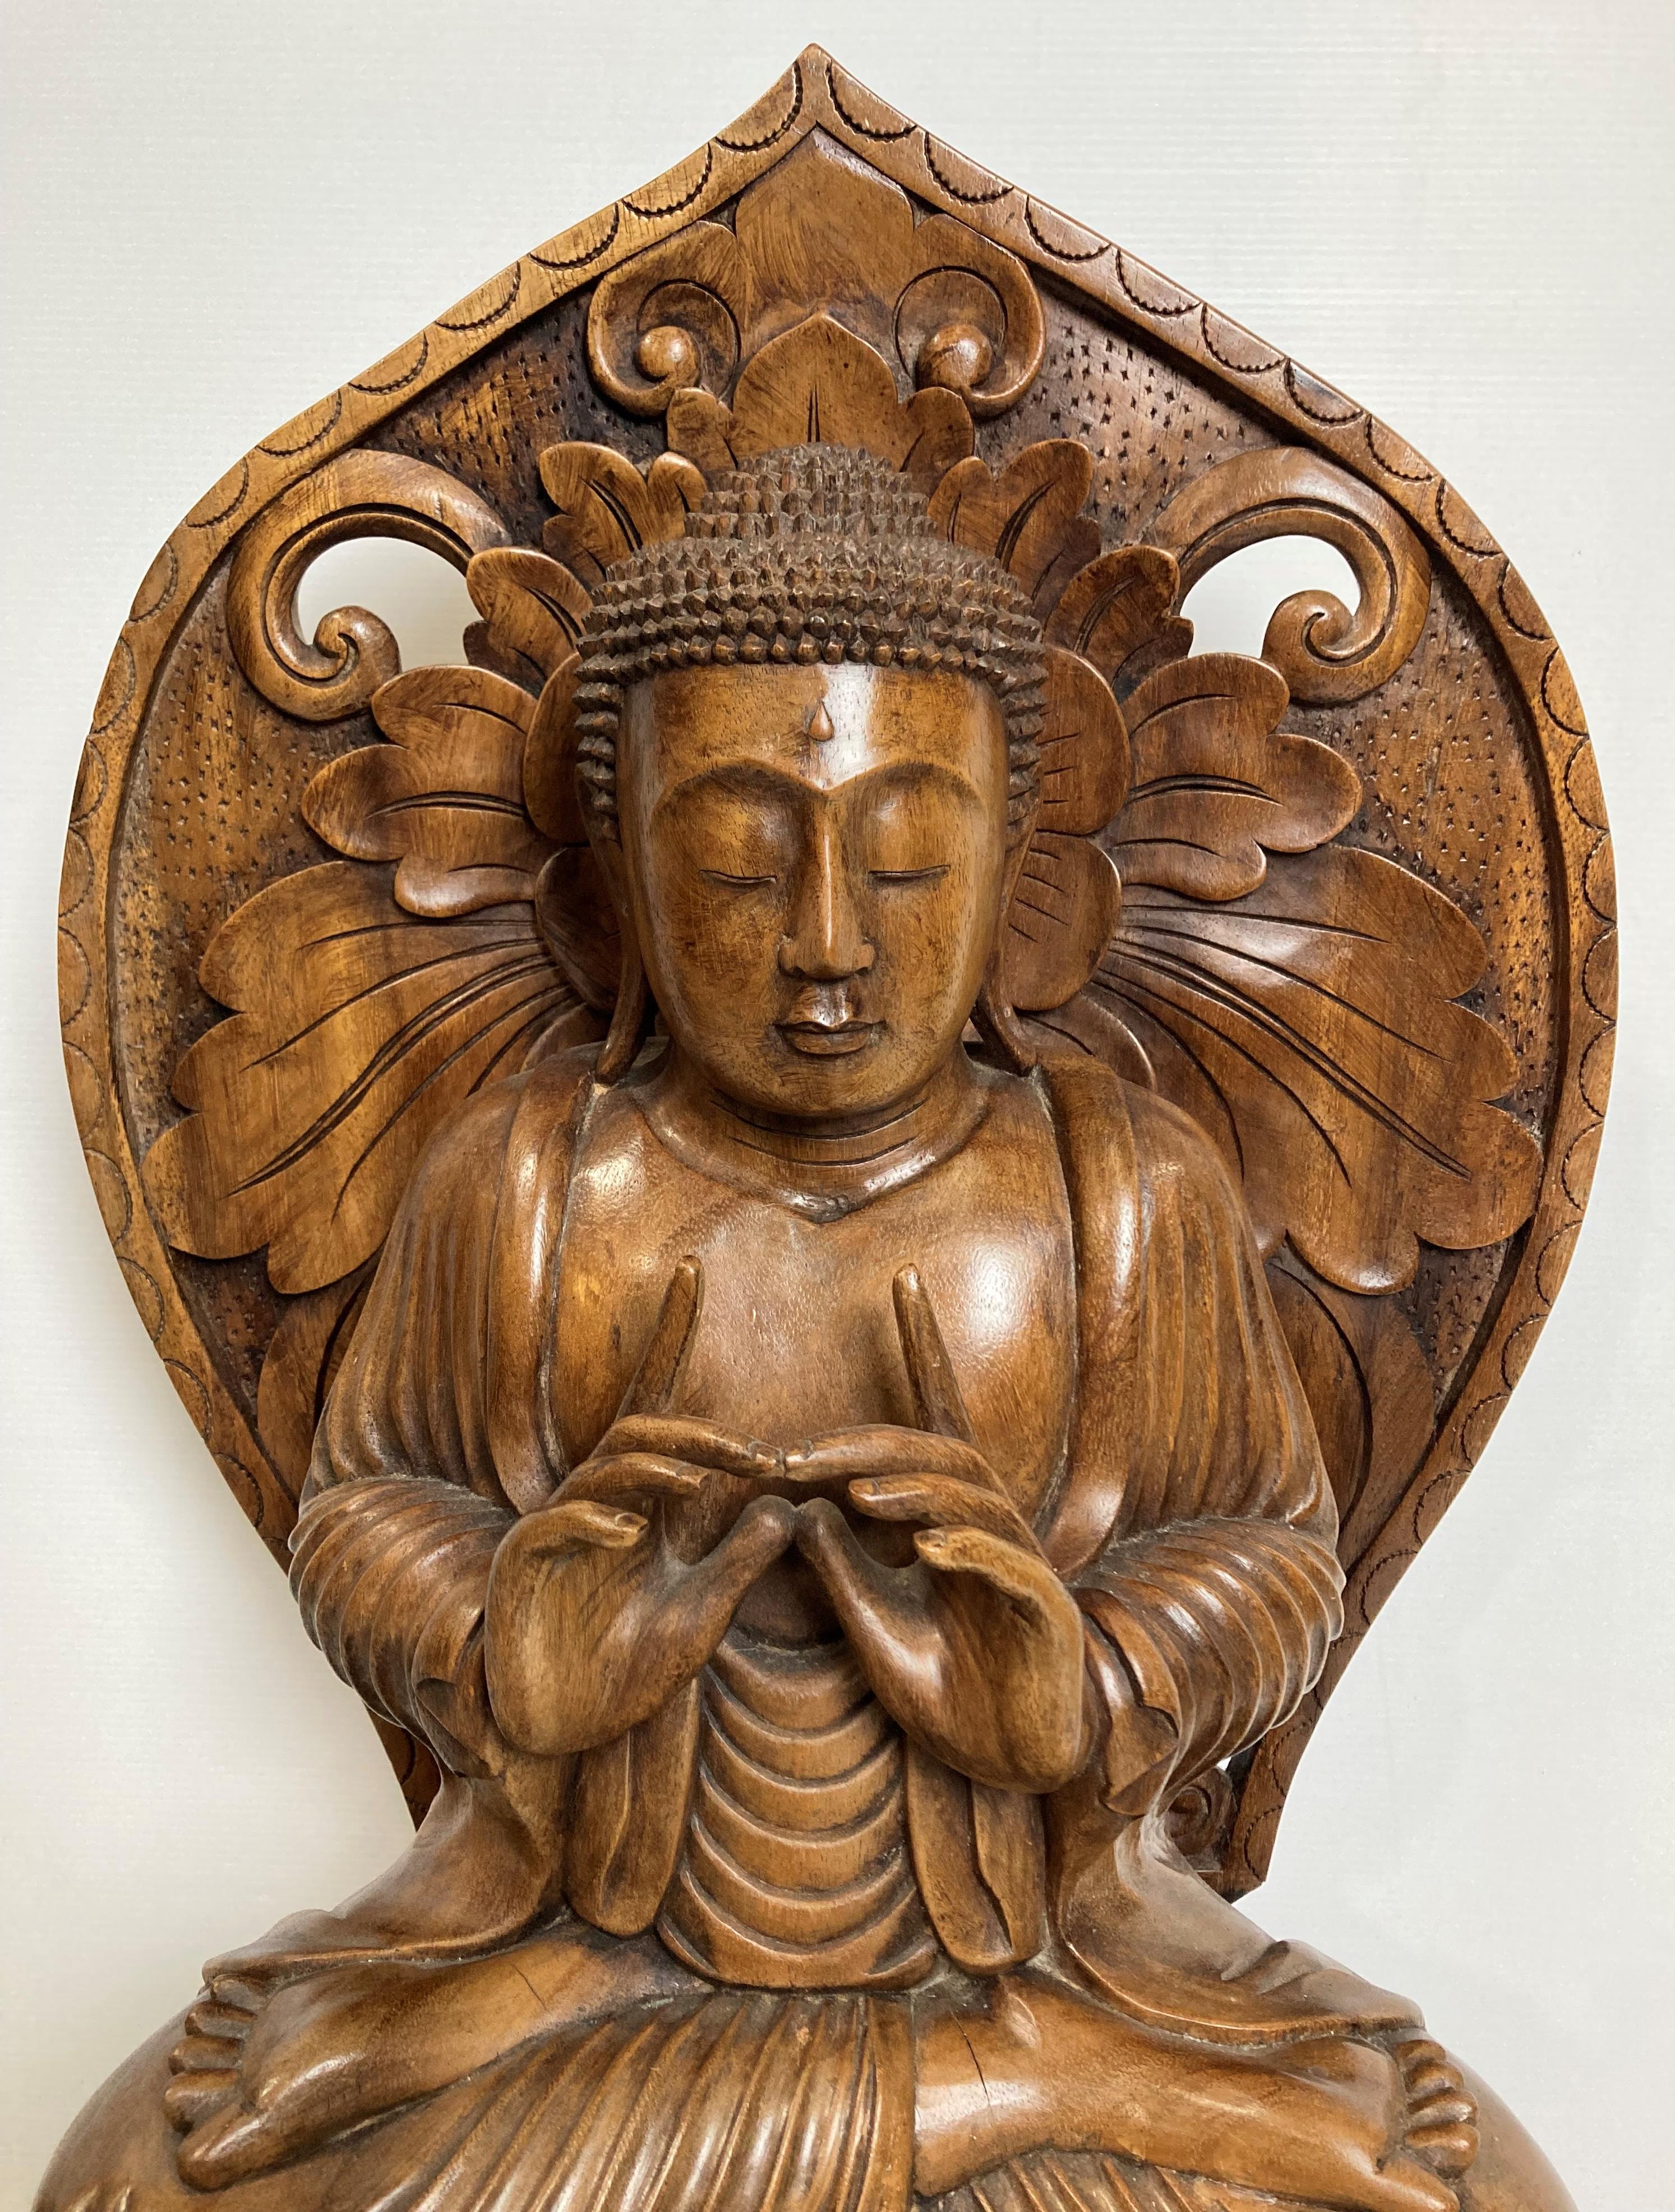 An Oriental wooden hand-carved meditating Buddha on lotus leaf - possibly Early 20th Century - 70cm - Image 2 of 5